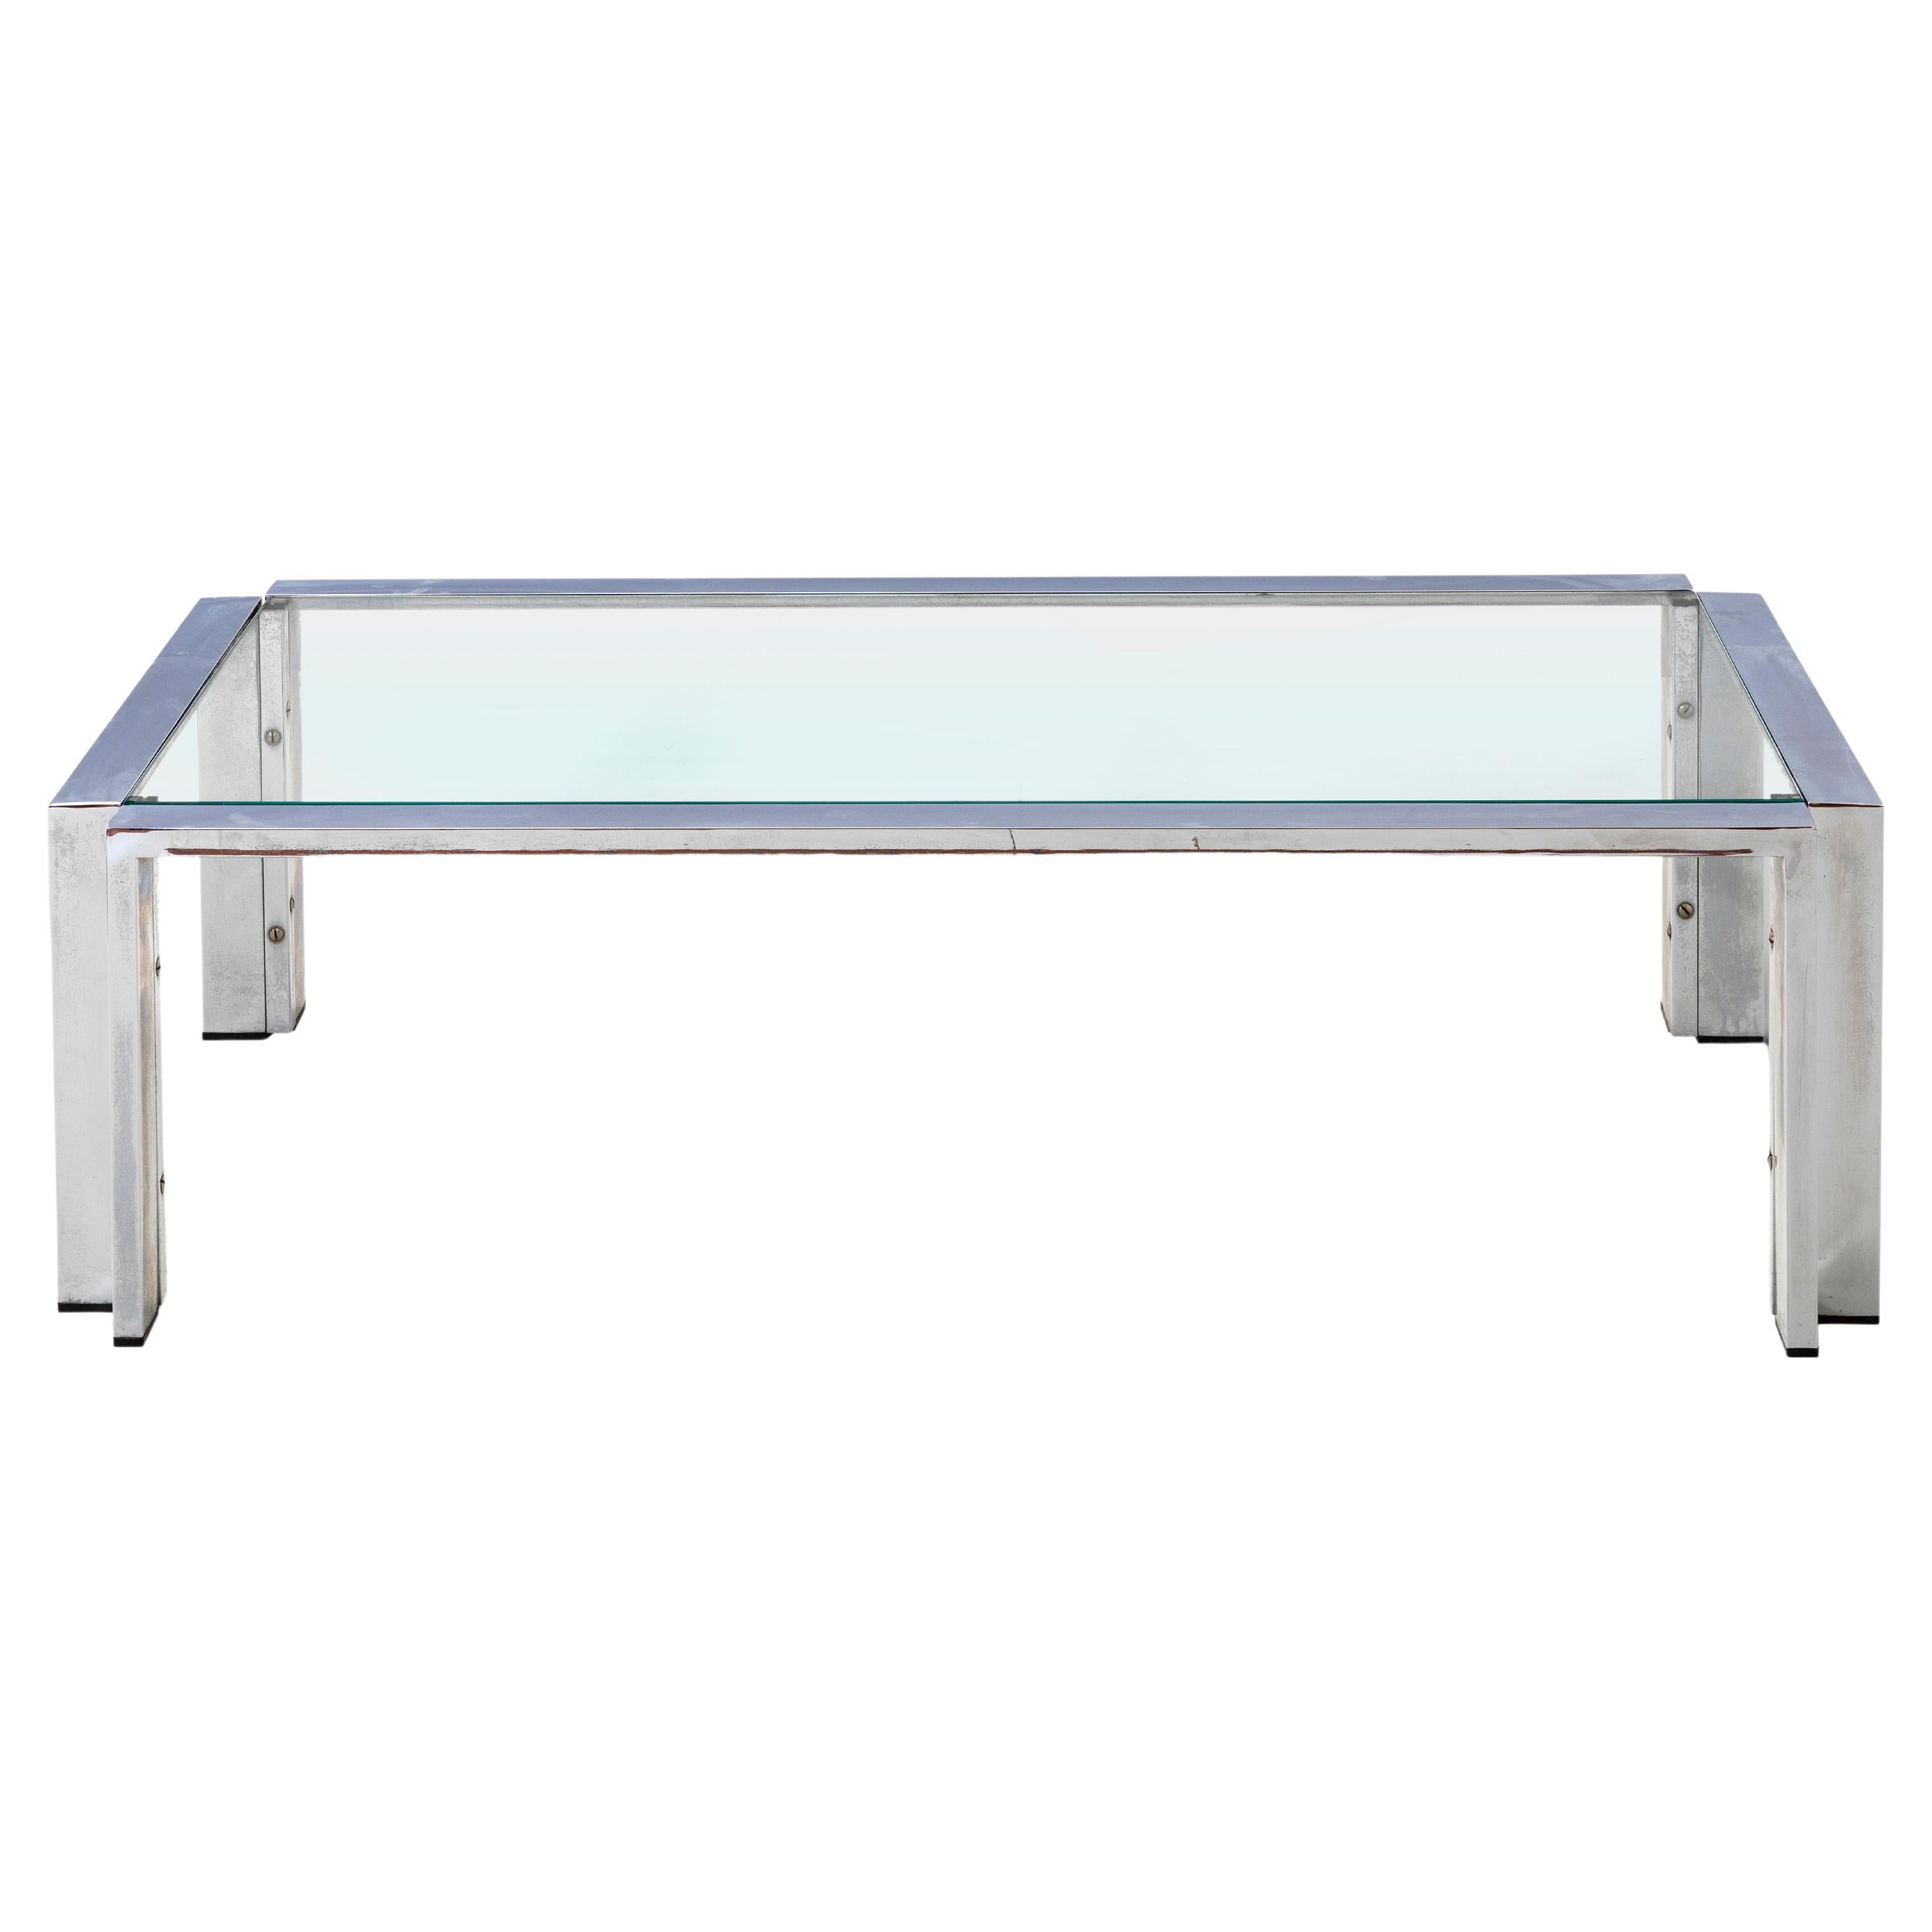 Romeo Rega Prod. Italy, C. 1970 Glass Table with Steel Frame and Edges